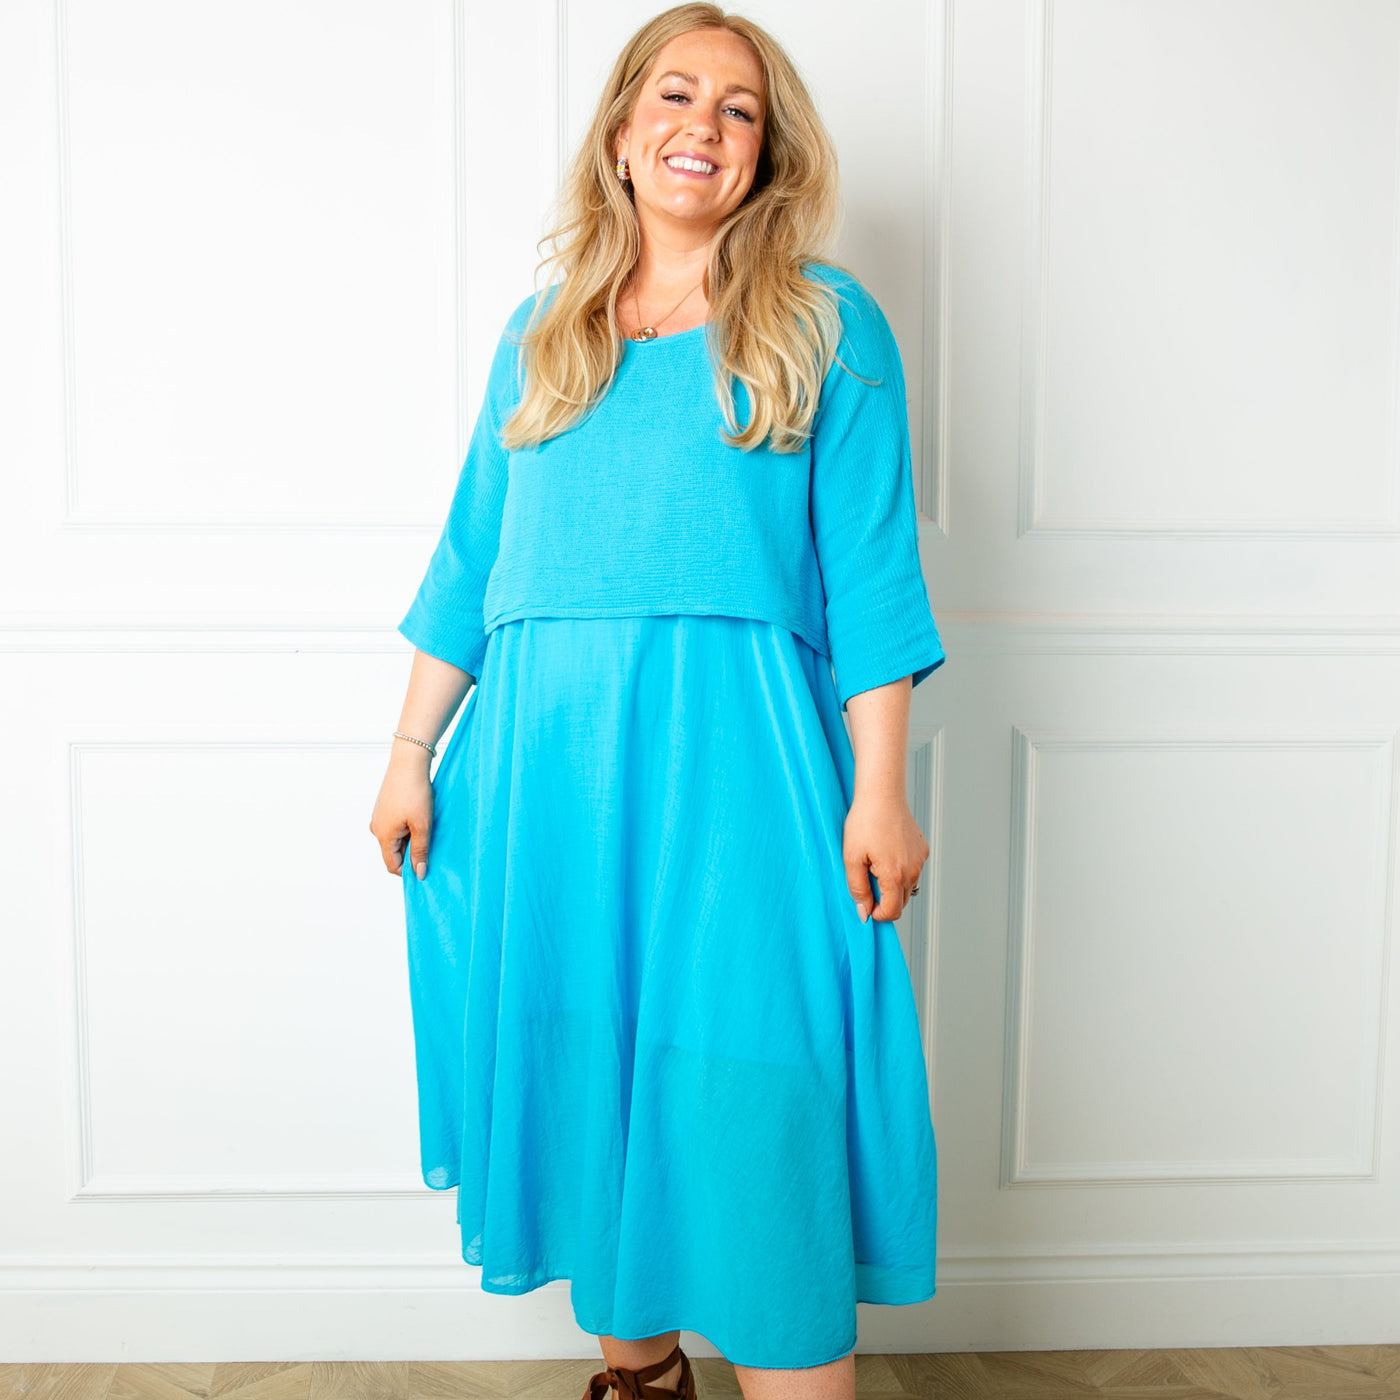 The aqua blue Two Piece Dress with a top that has 3/4 length sleeves and a round neckline